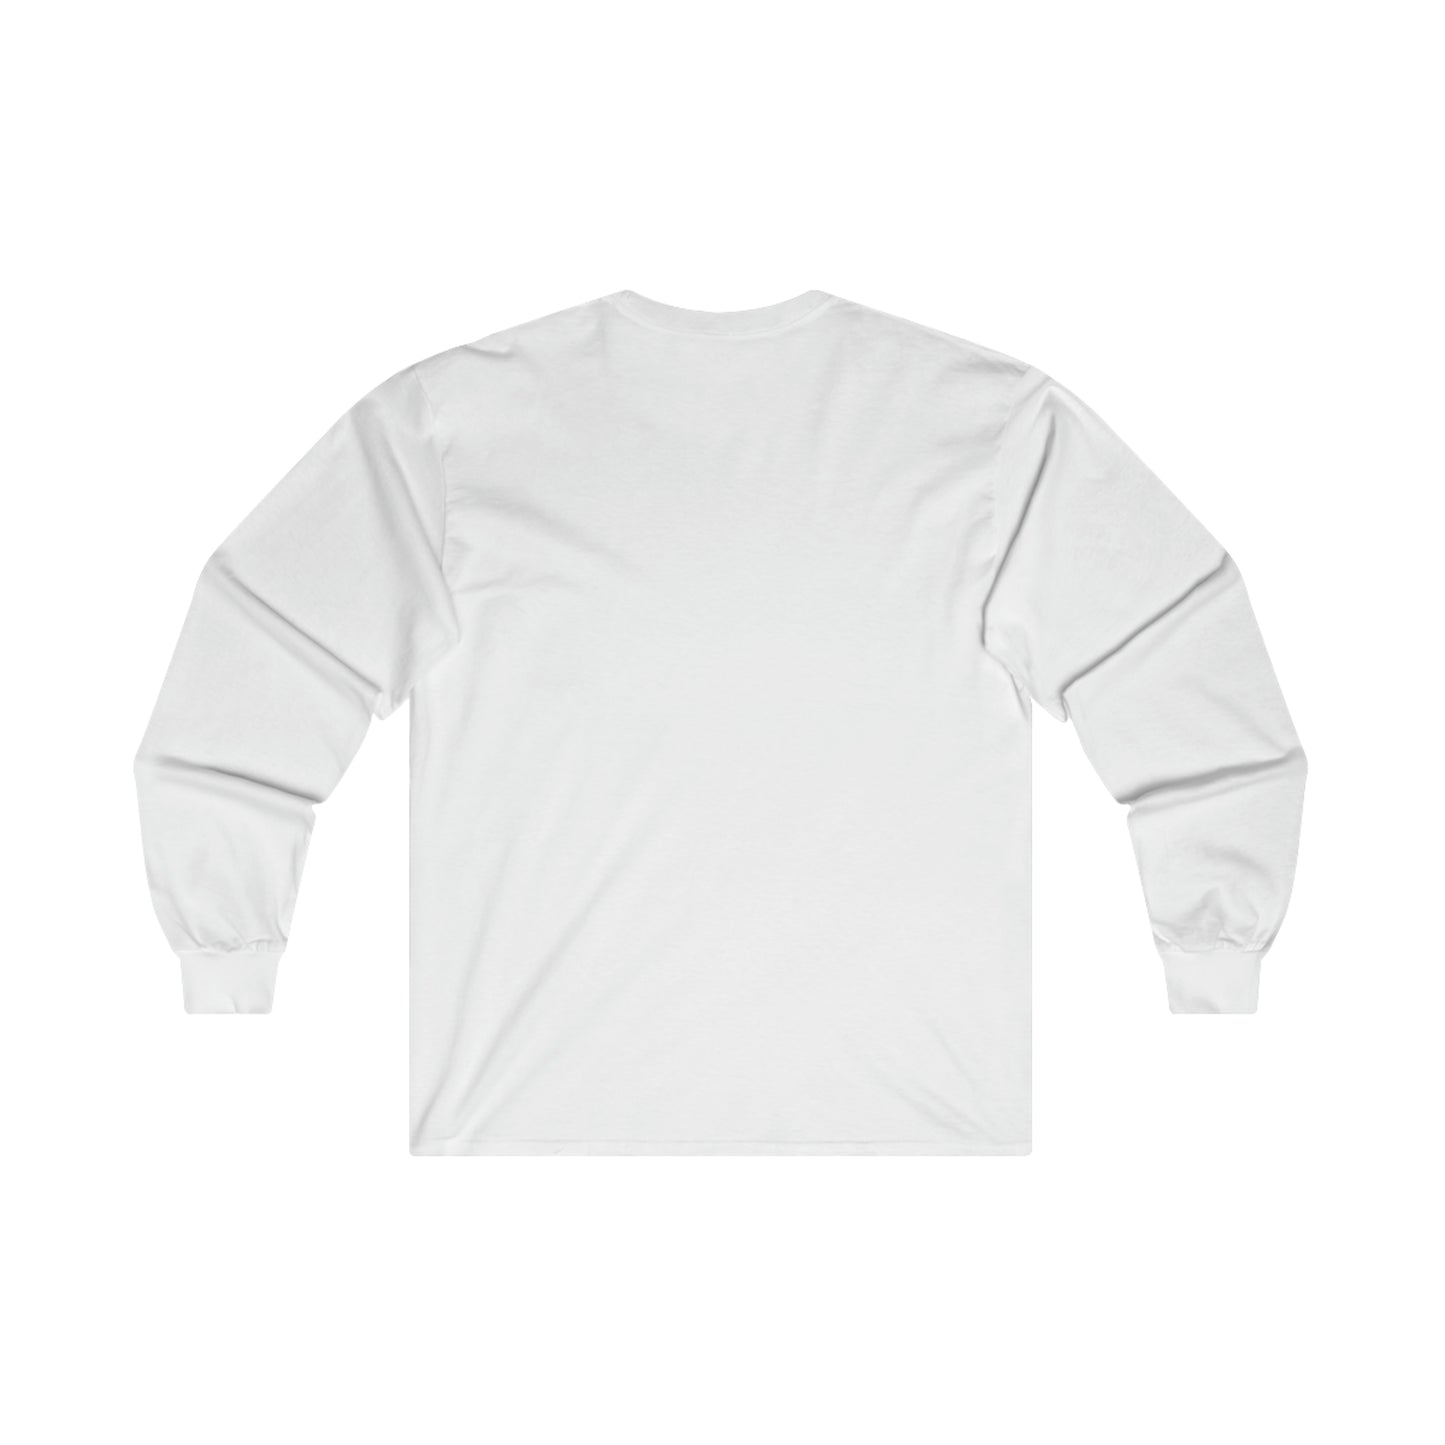 Jordan and Pippen Barbecue and 30 rack - Ultra Cotton Long Sleeve Tee